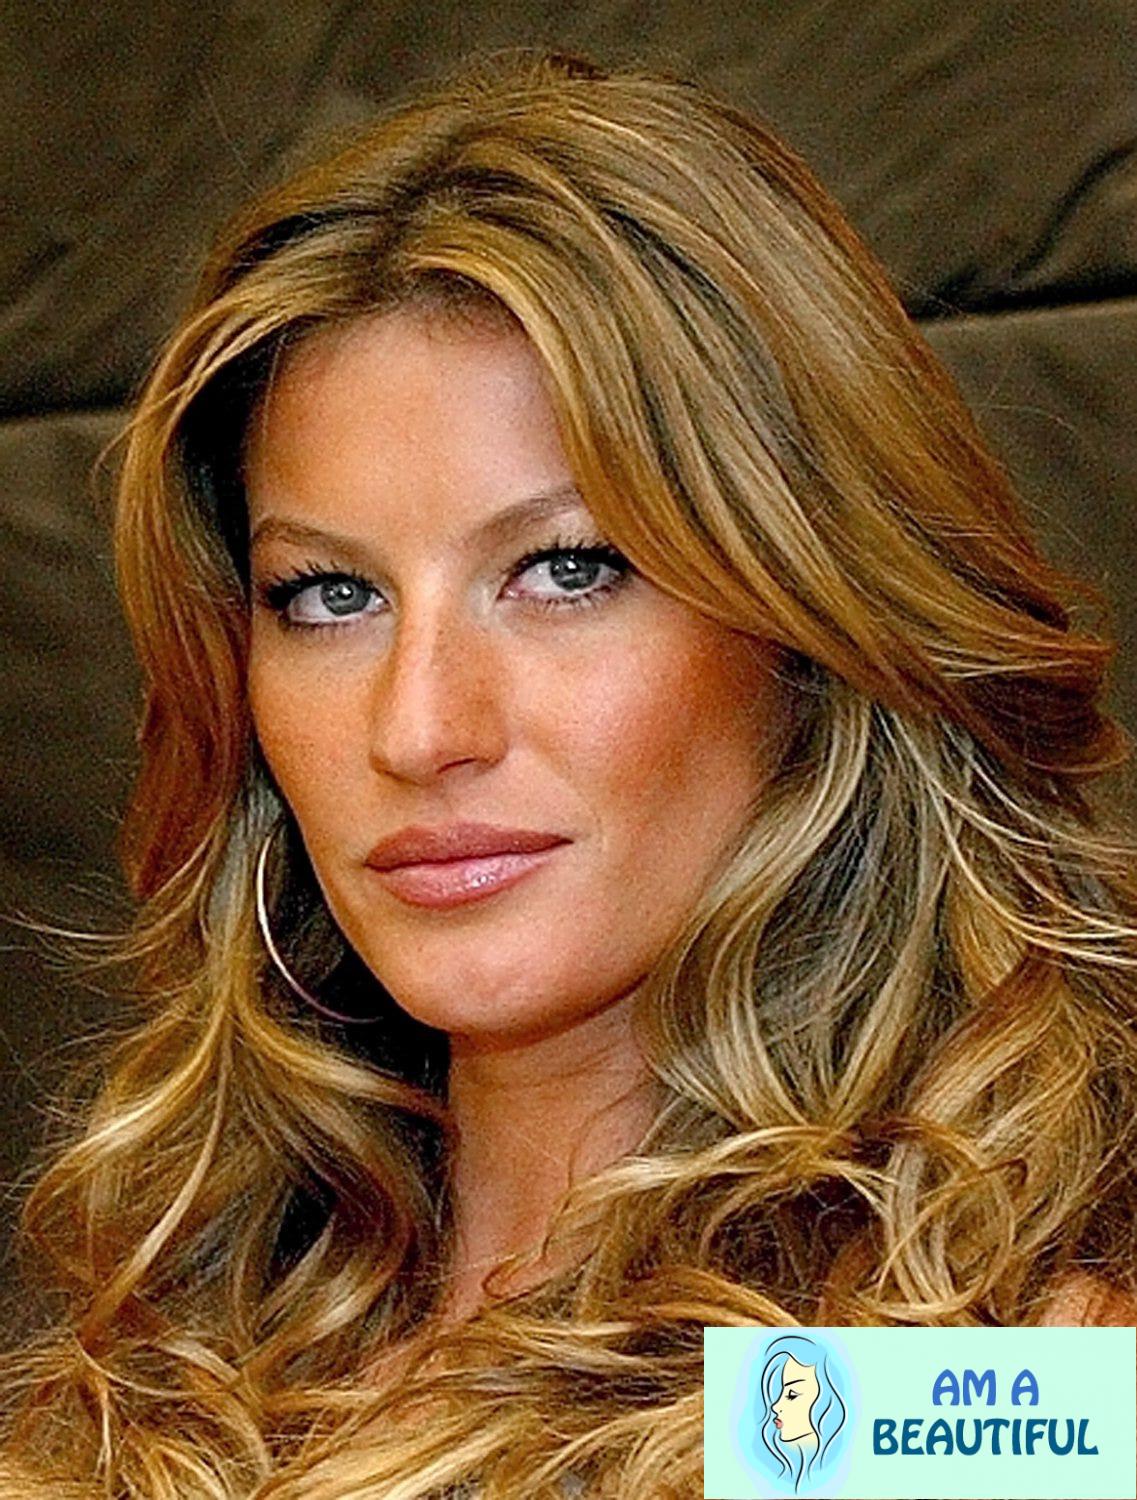 When Gisele Bundchen was at the height of supermodel fame, we went to Miami to talk to her